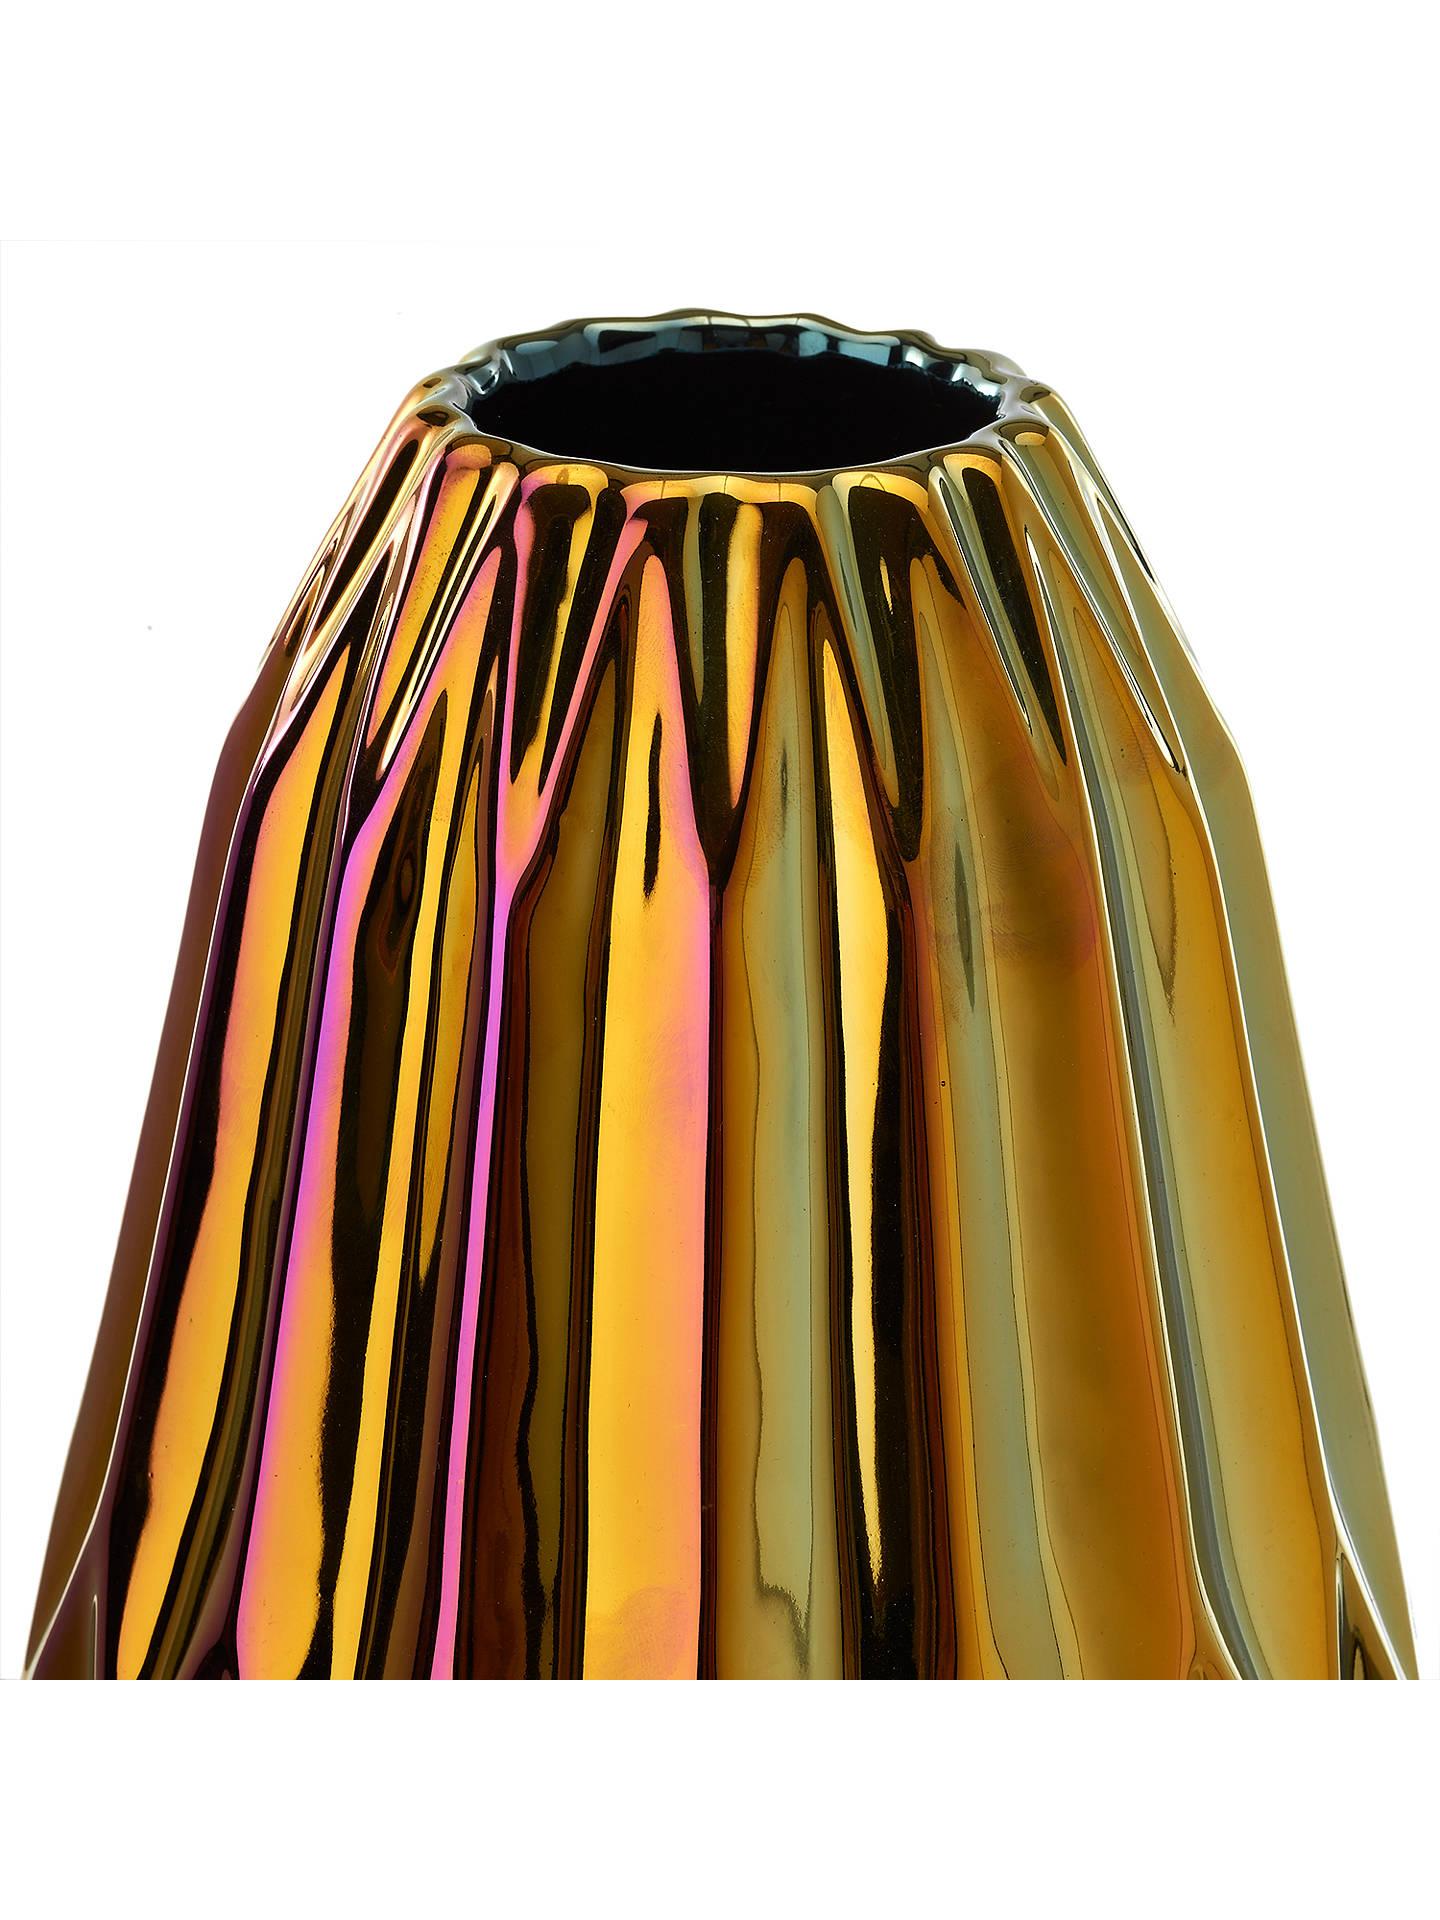 The oily folds vase is a round ceramic vase that has an iridescent finish with a geometric silhouette. The shades of color are effected by different variations of light. Designed and handcrafted in the Netherlands.

Measurements: 13” height x 6.5”